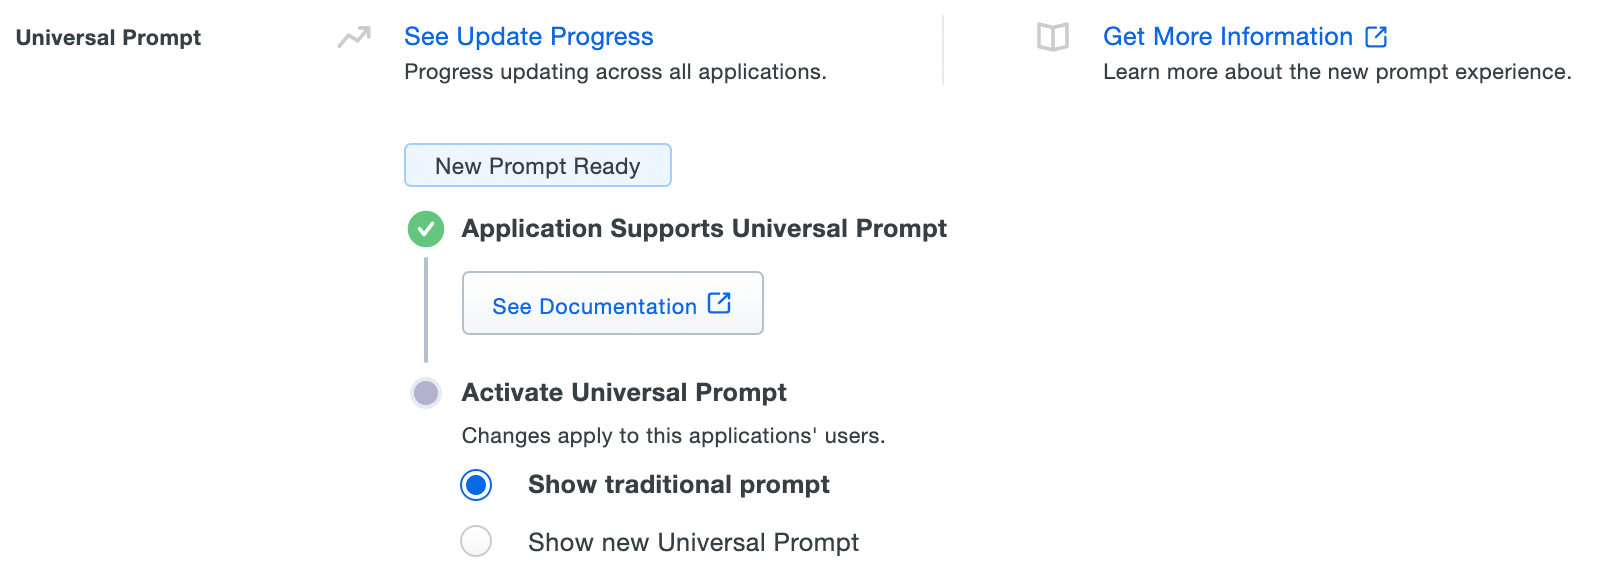 Universal Prompt Info - Application Ready for Universal Prompt